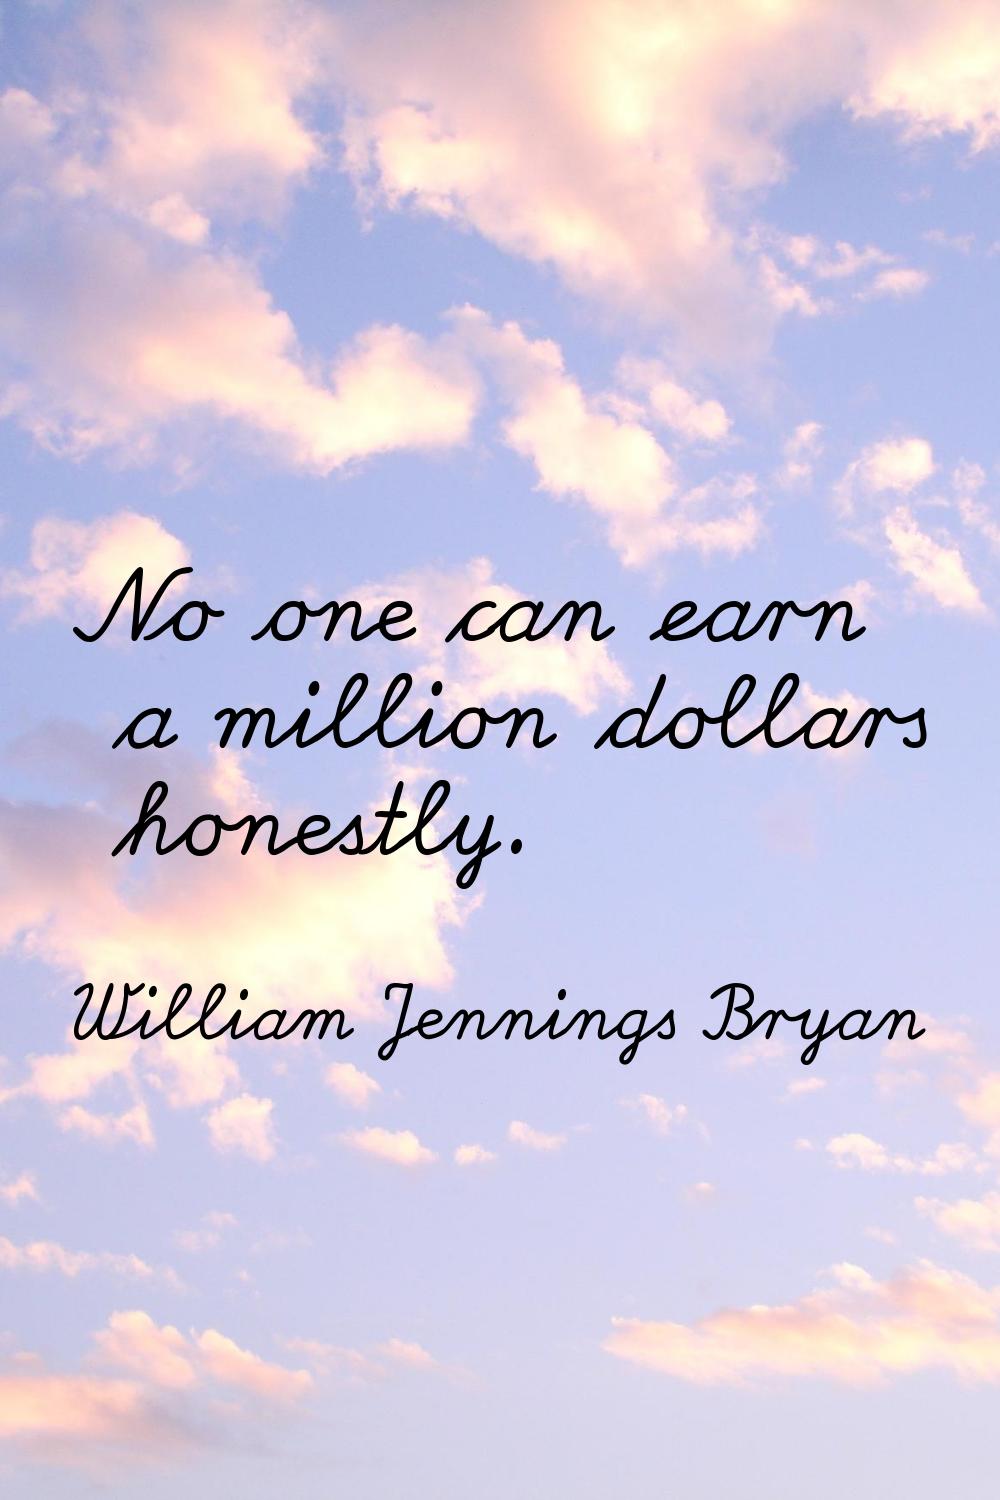 No one can earn a million dollars honestly.